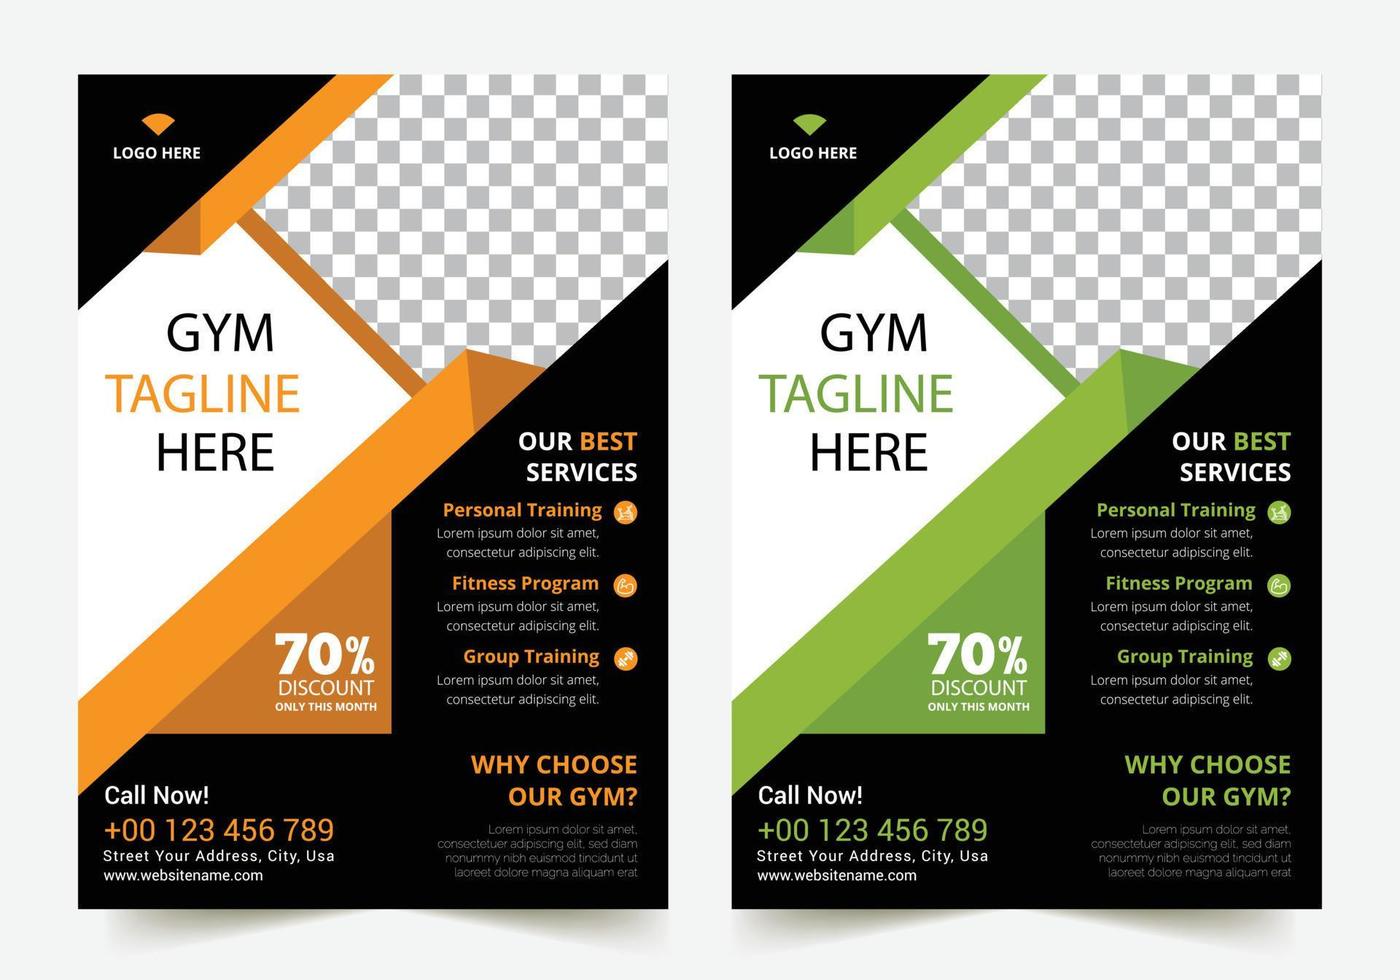 Business Gym Fitness  Flyer yellow and green color design corporate template design for annual report company leaflet cover vector